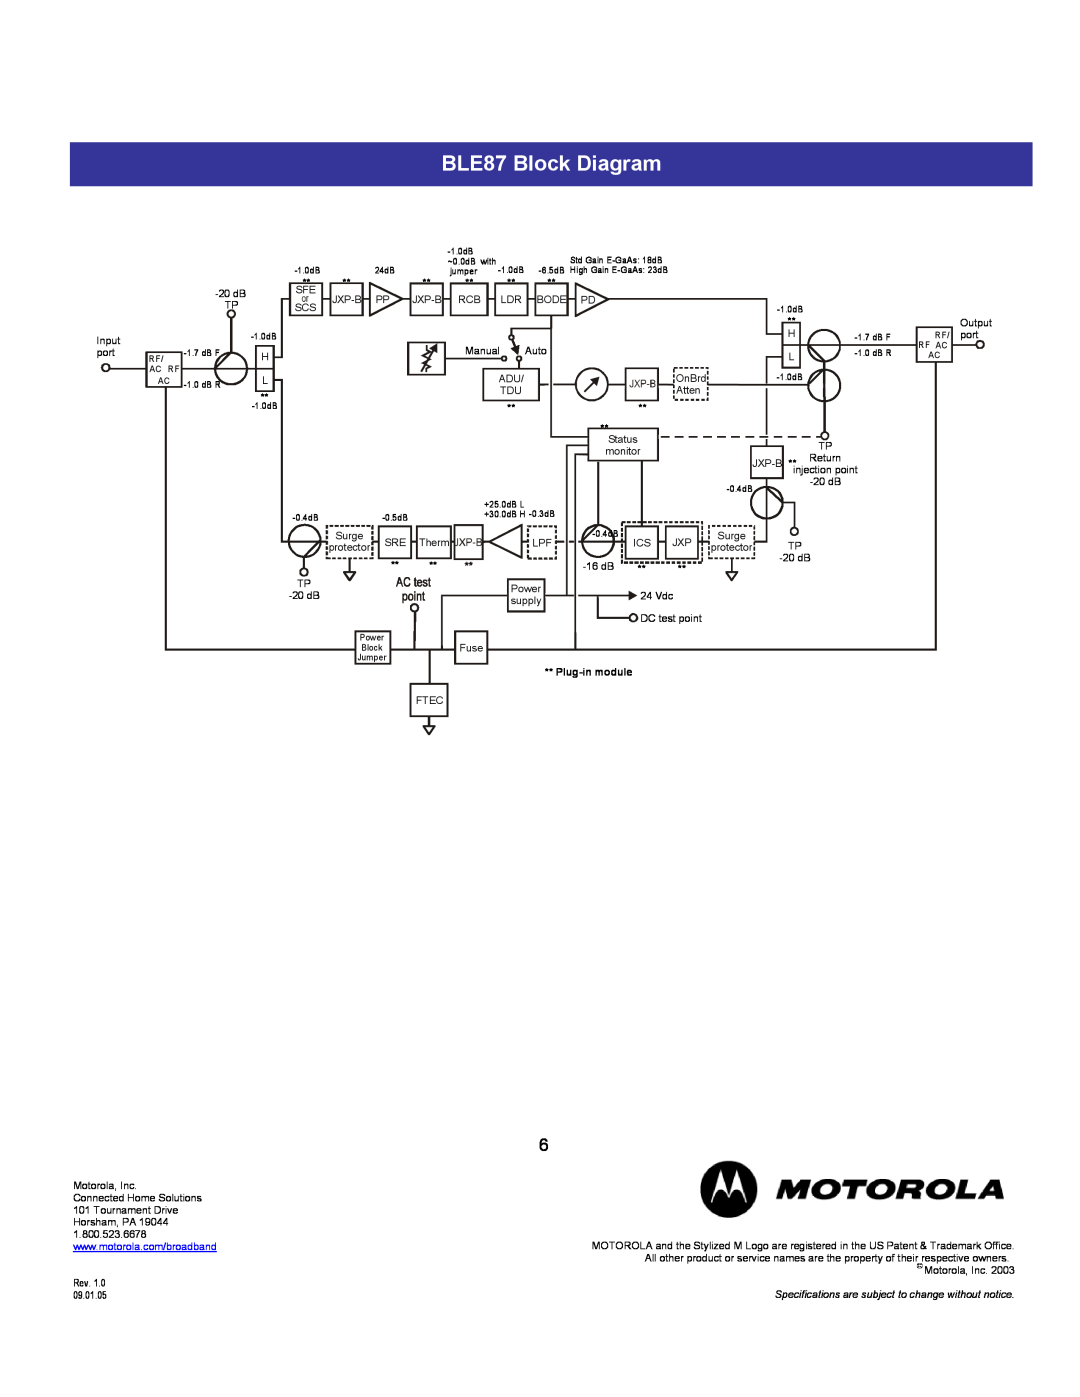 Motorola specifications BLE87 Block Diagram, Plug-in module, Specifications are subject to change without notice 